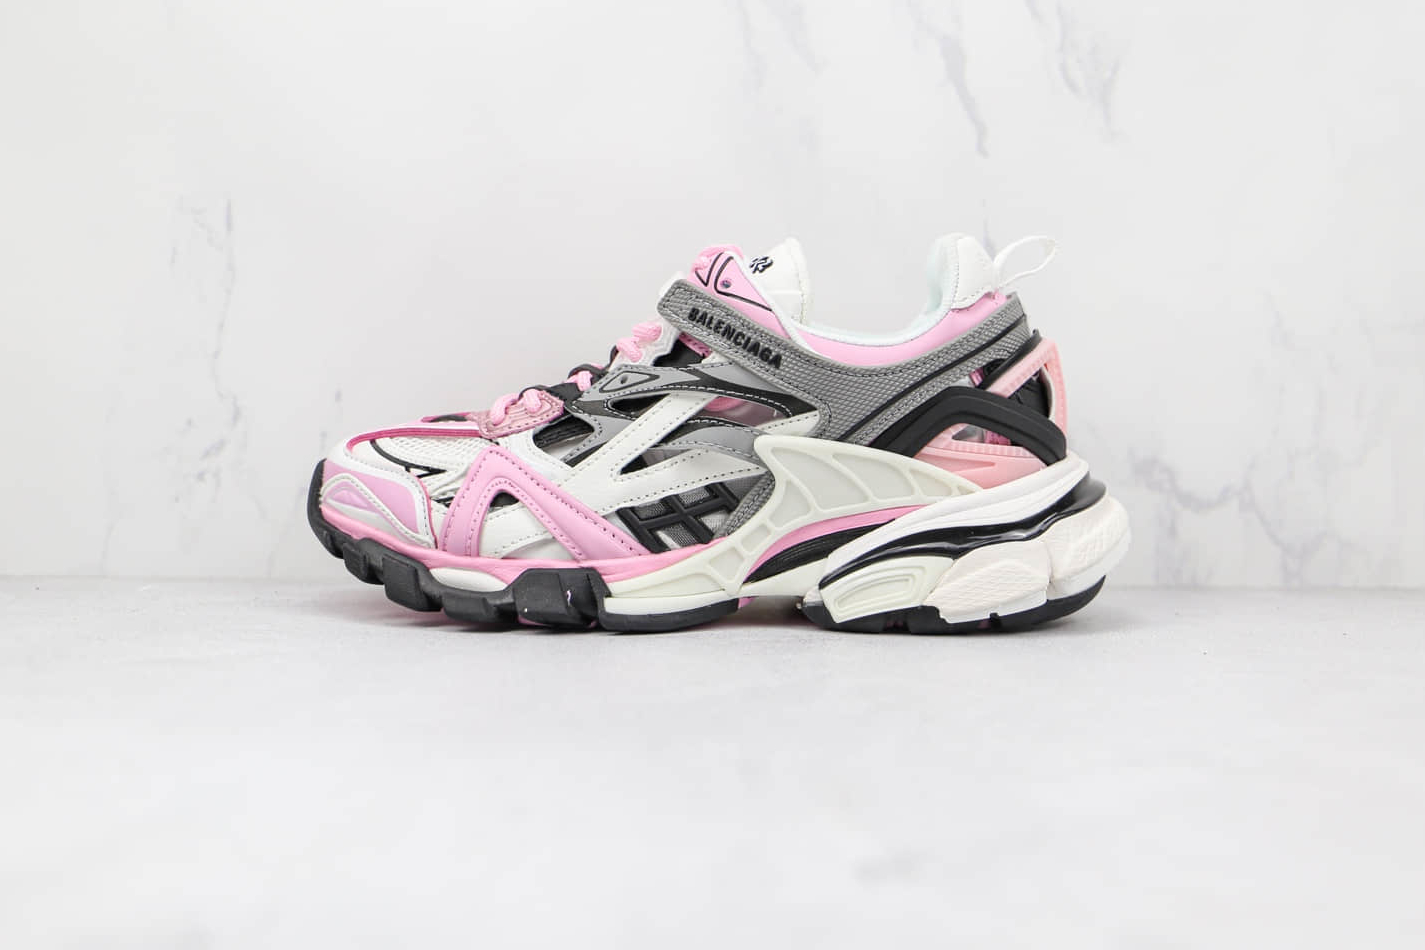 Balenciaga Track.2 Sneaker 'Pink' 568615W3AE25291 - Newest Fashion Sneakers for Women